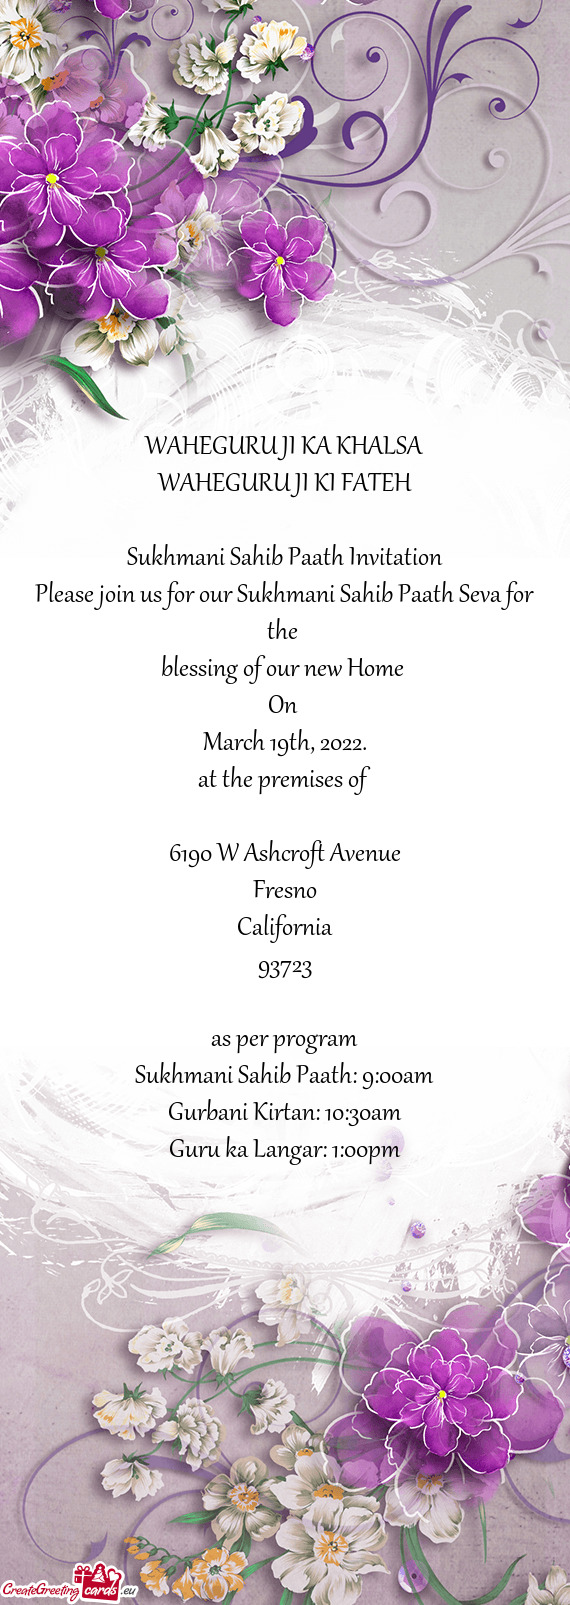 Please join us for our Sukhmani Sahib Paath Seva for the